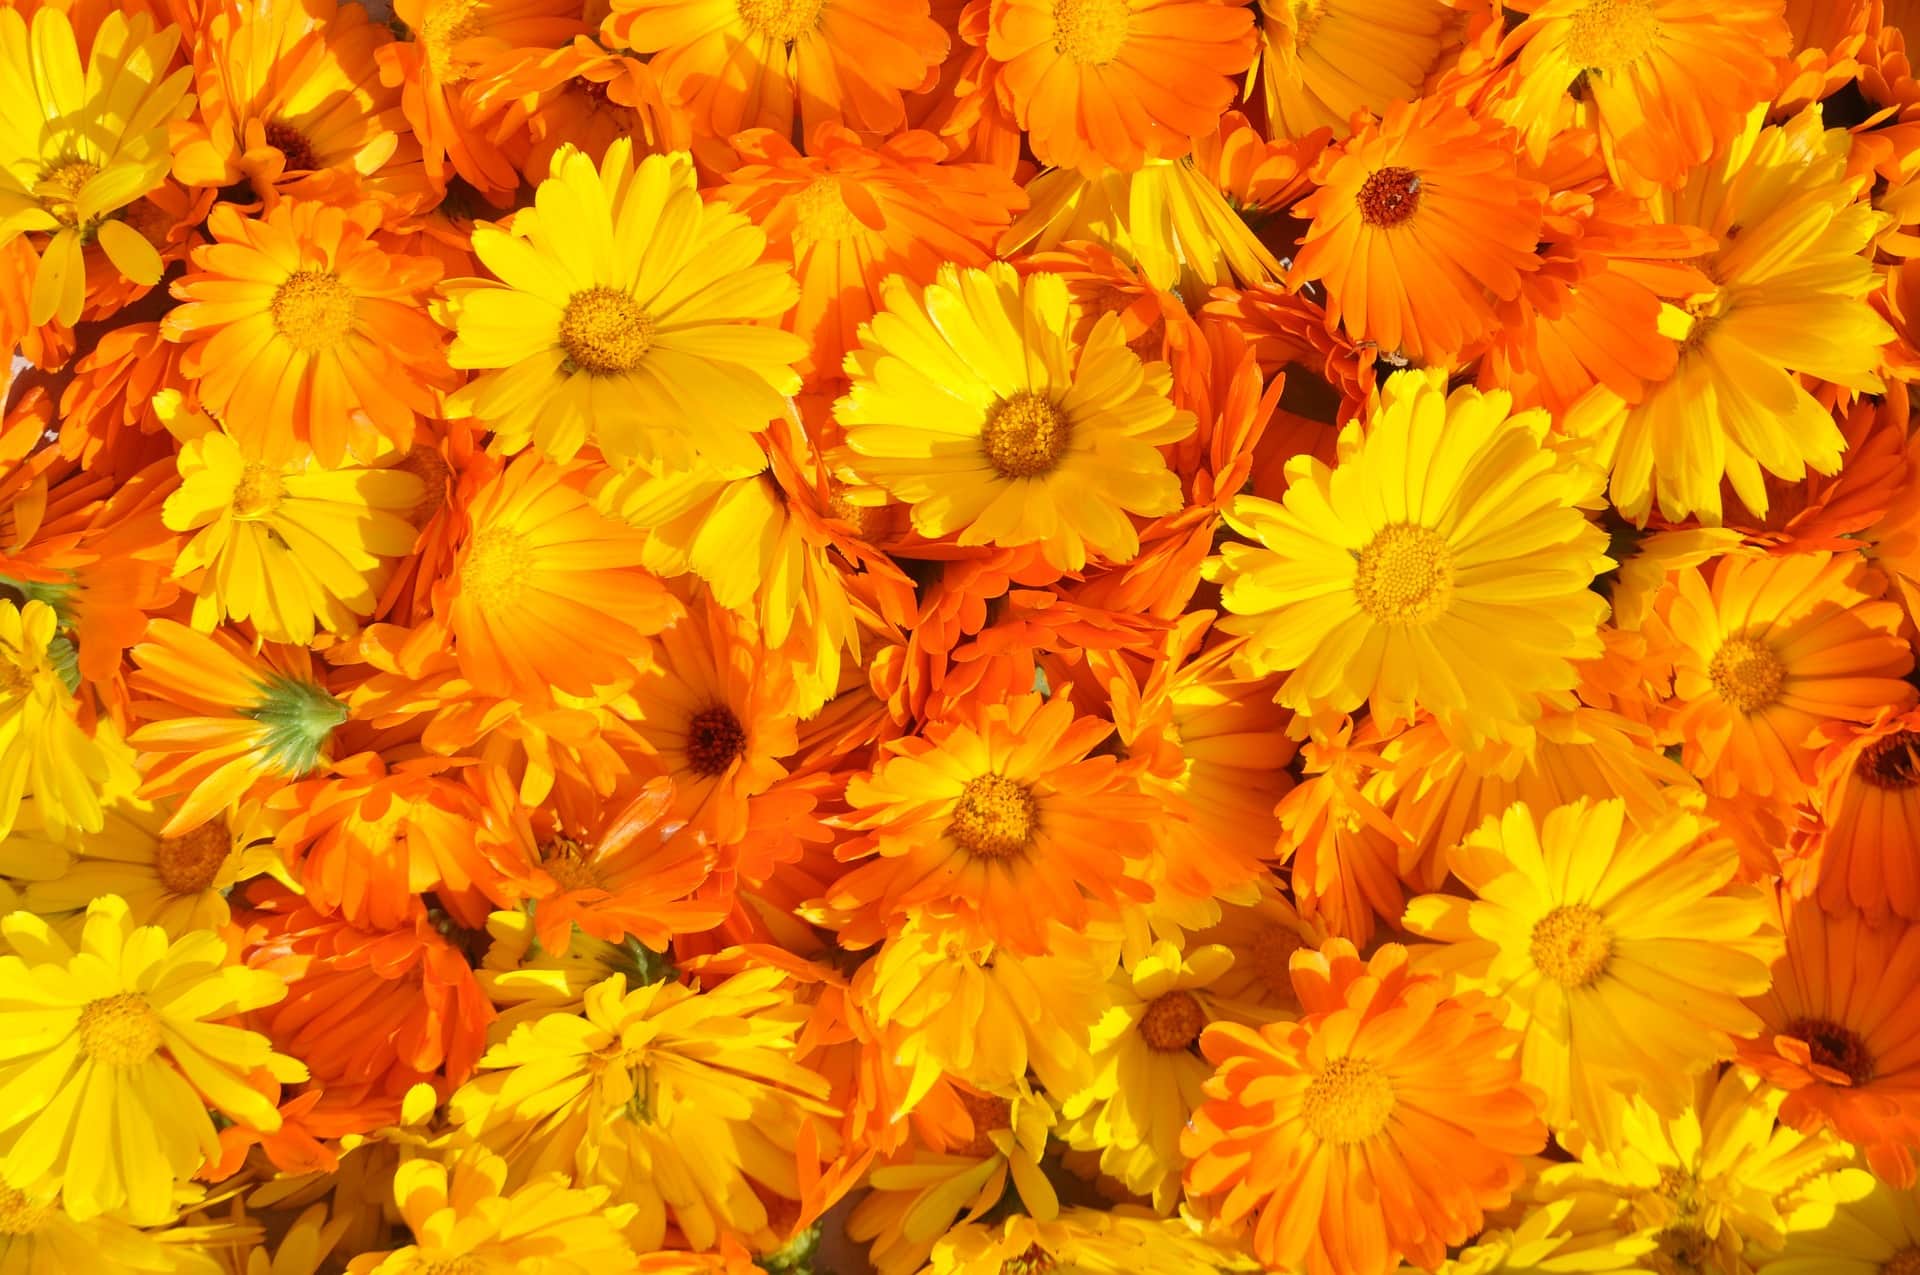 image is filled with yellow and orange calendula flowers